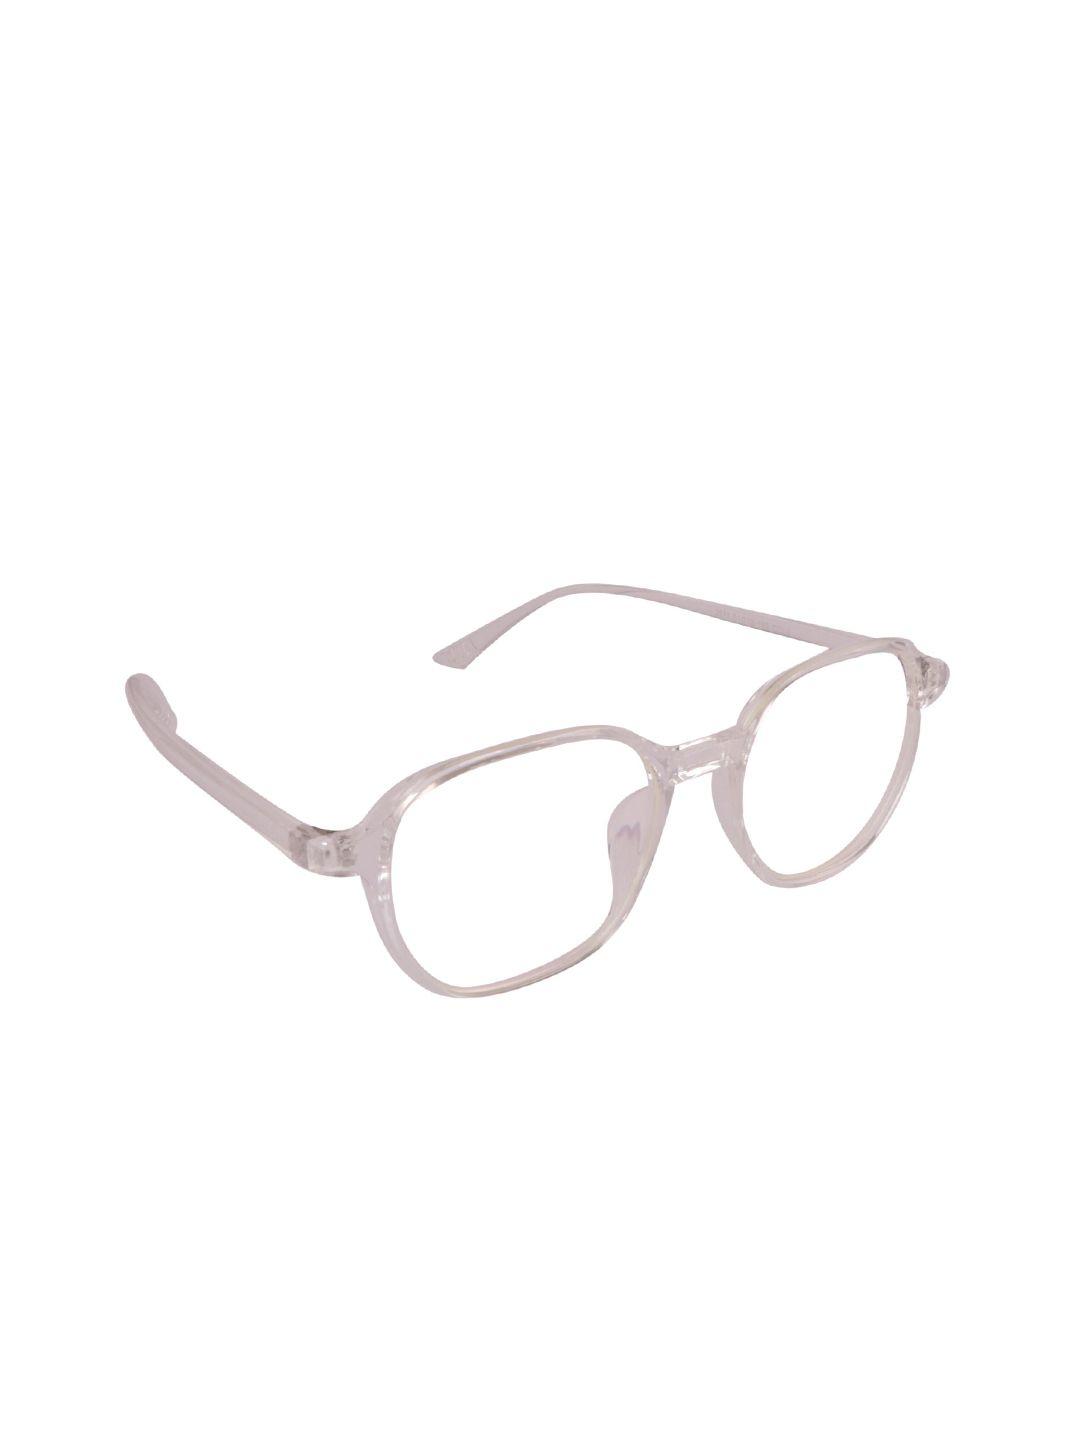 optify clear lens & white round sunglasses with uv protected lens m tp-2511